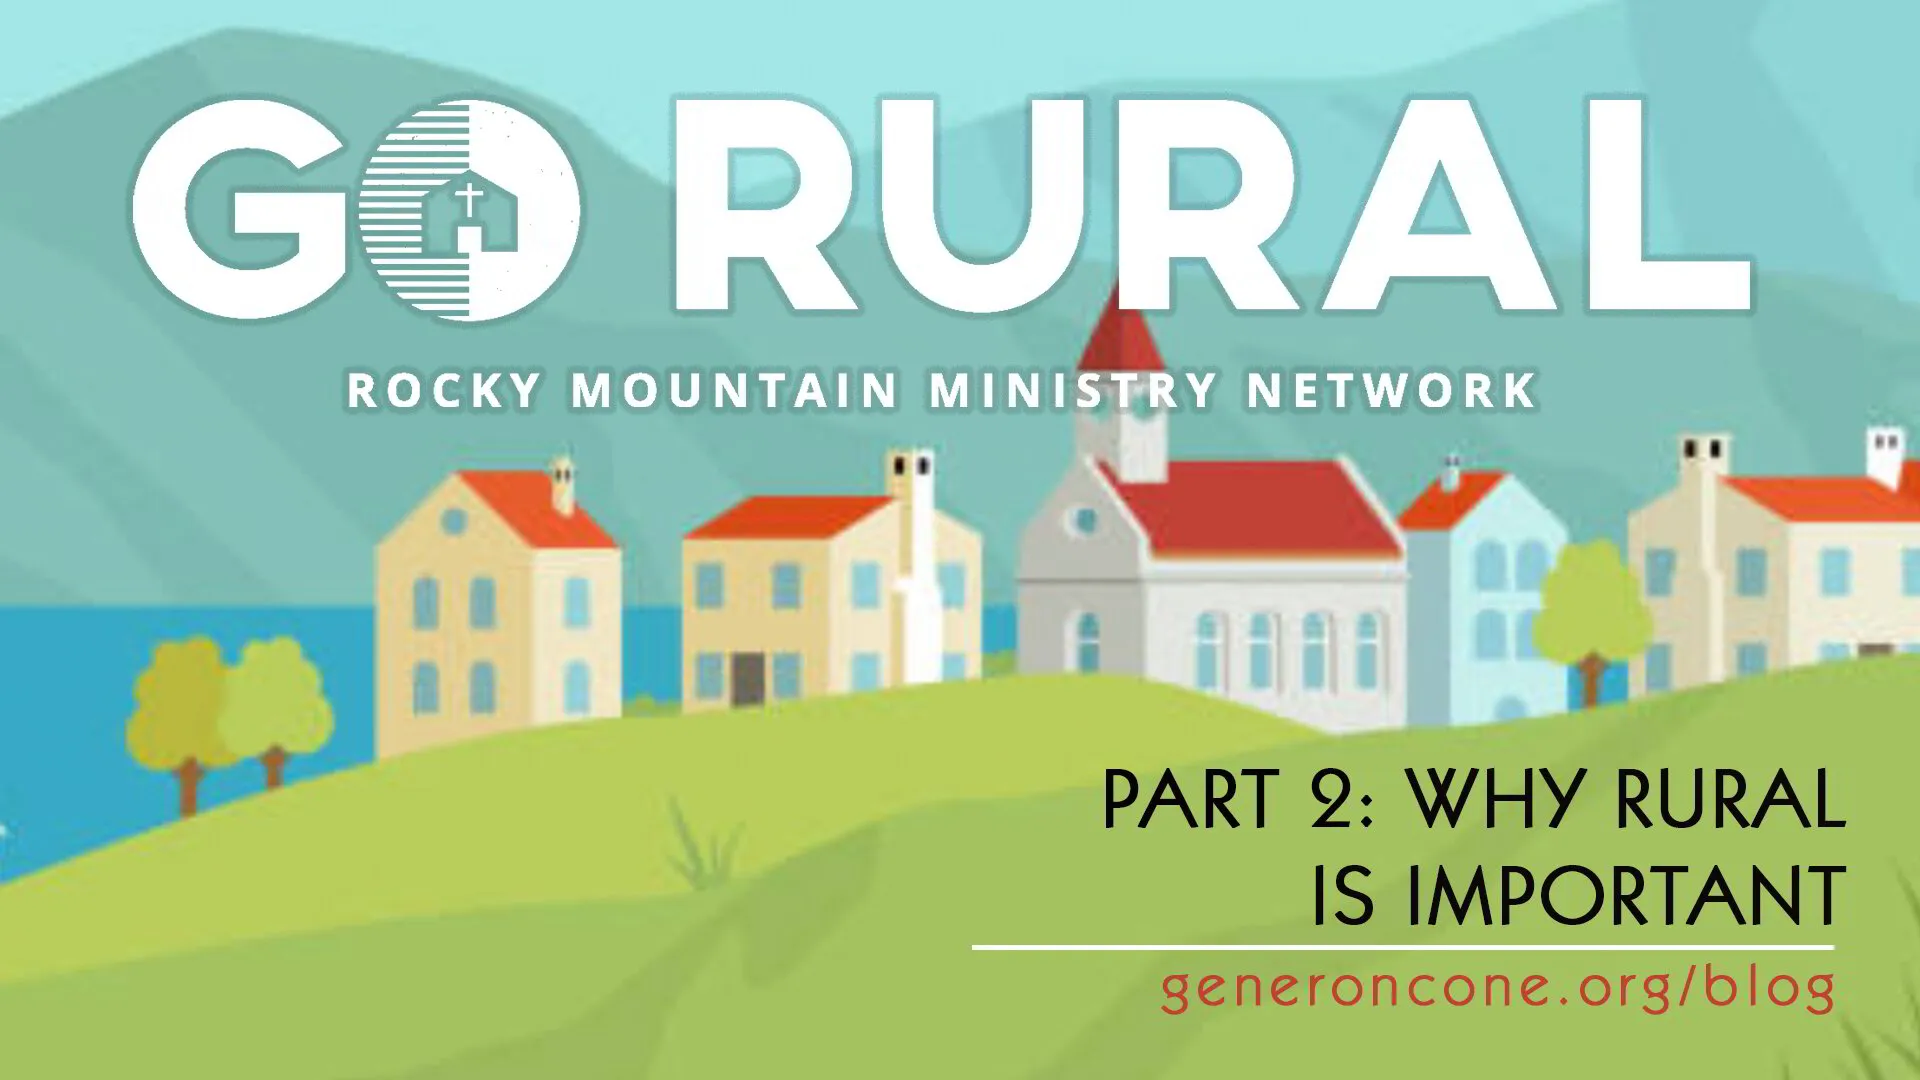 Go Rural, Part 2: Why Rural Is Important